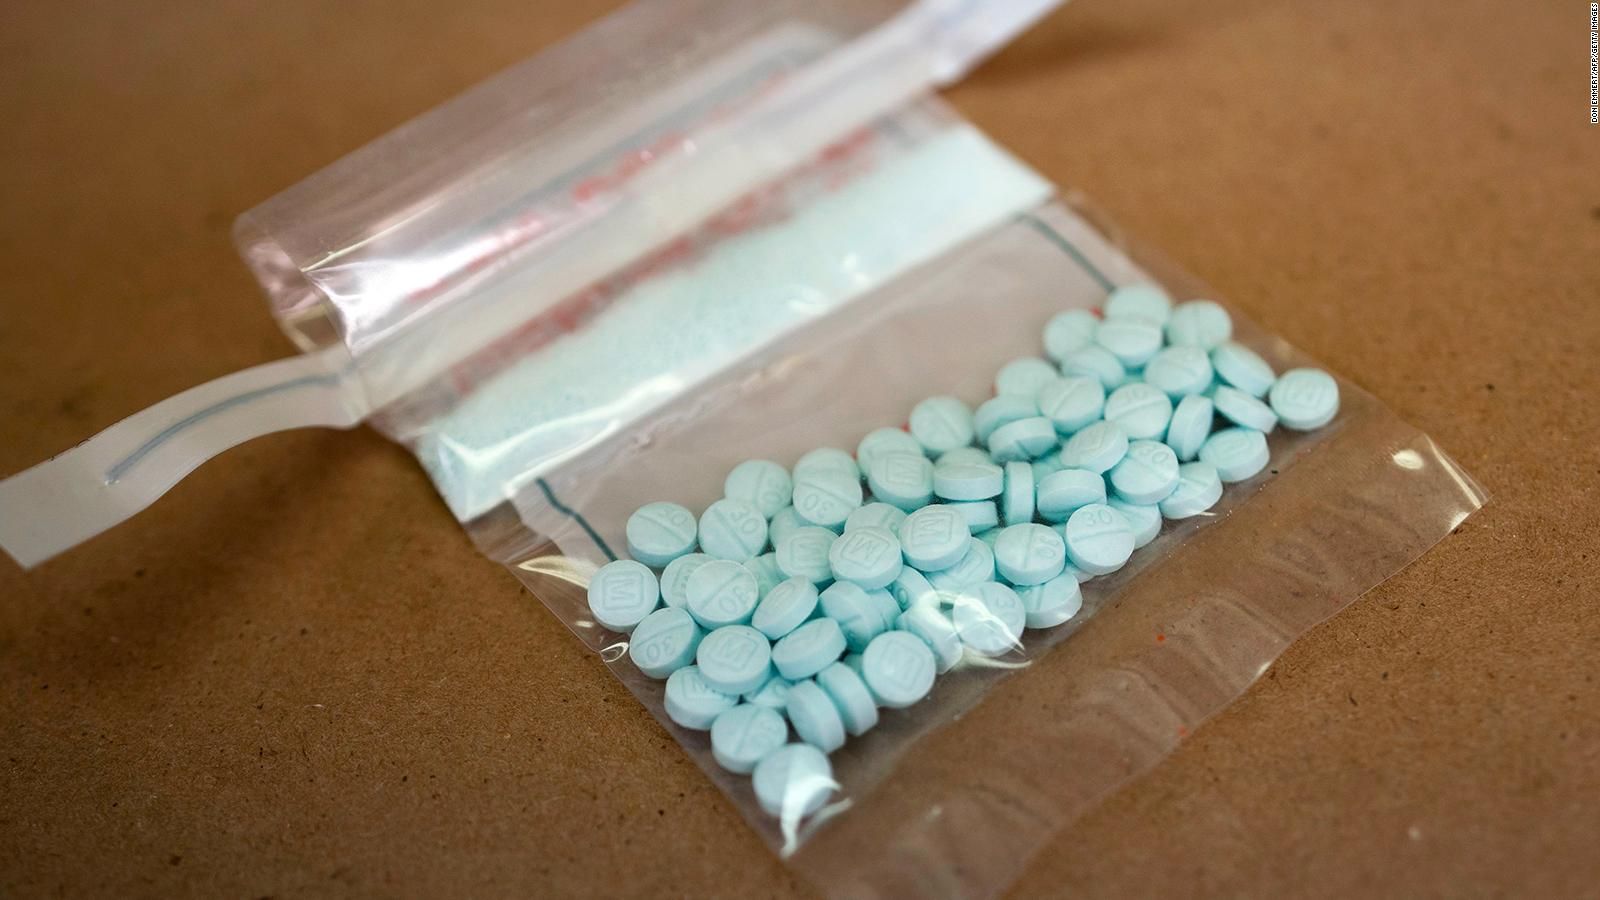 Drug overdose took 100,000 American lives in 12 months of the pandemic